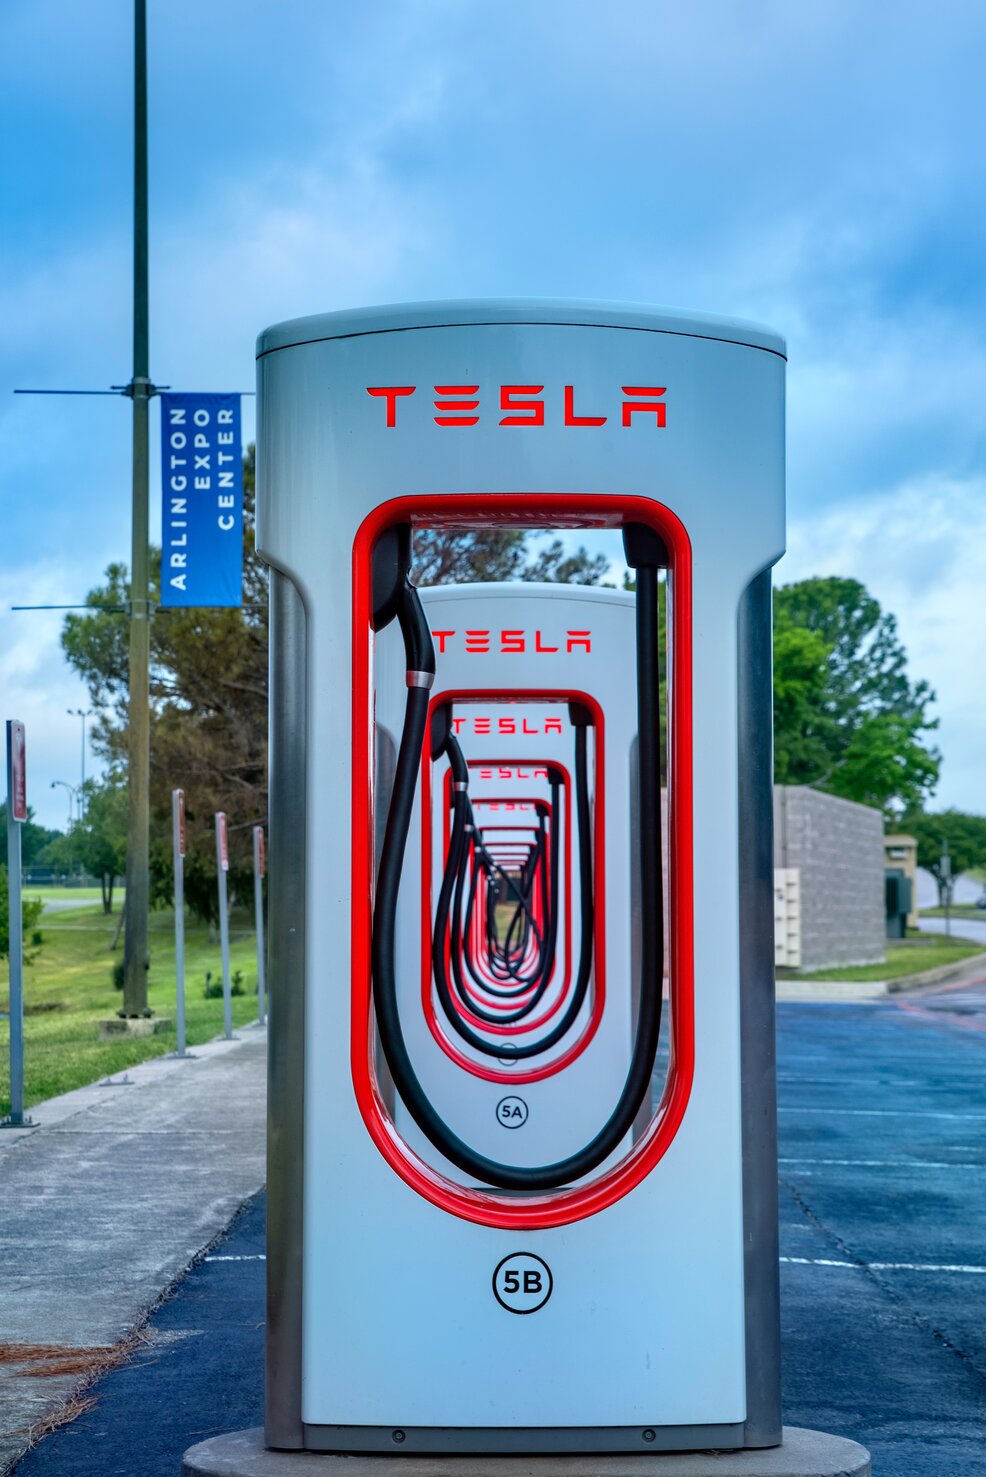 Tesla EV charging stations are called Superchargers